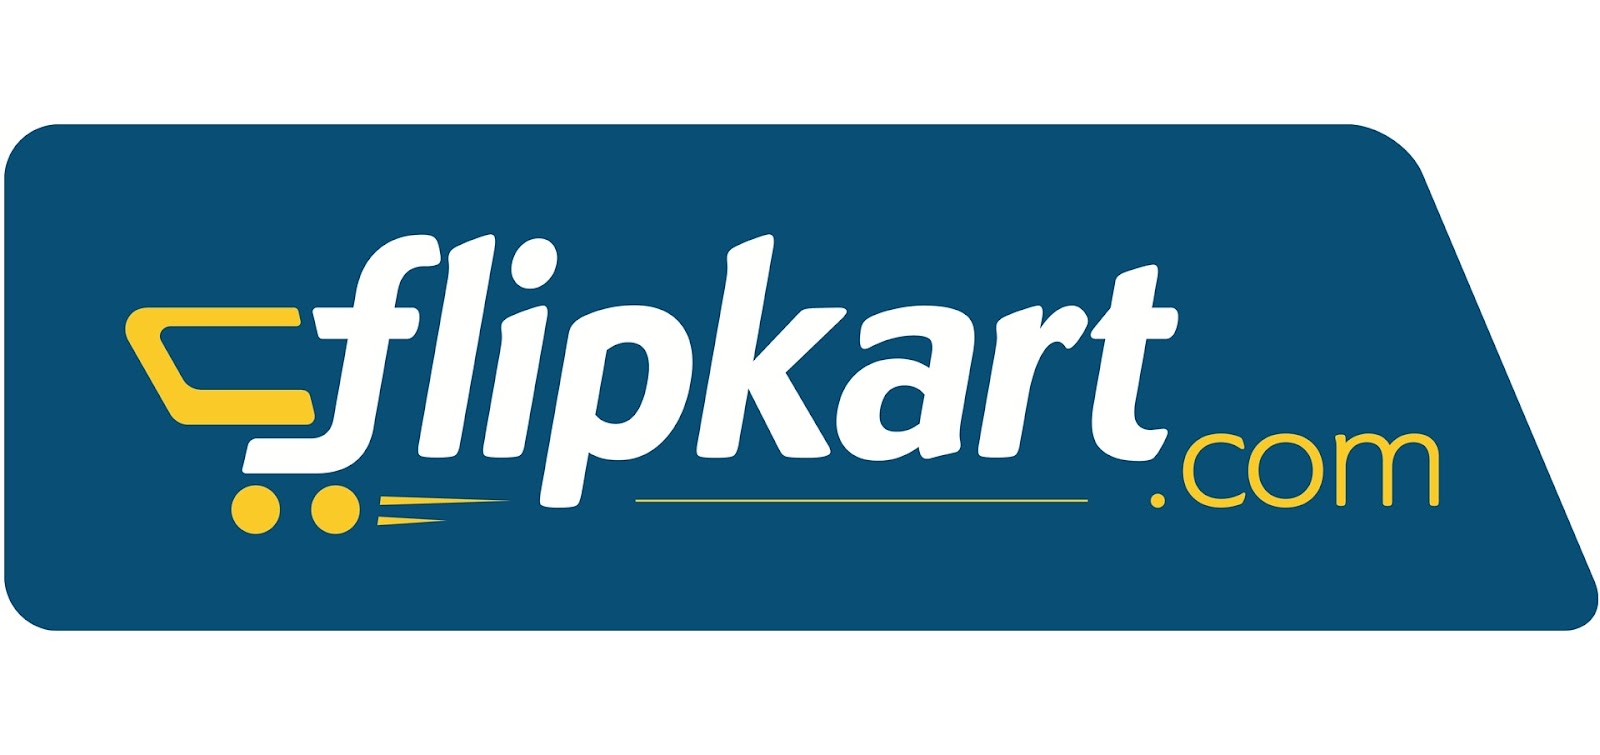 Flipkart – The most famous eCommerce website in India